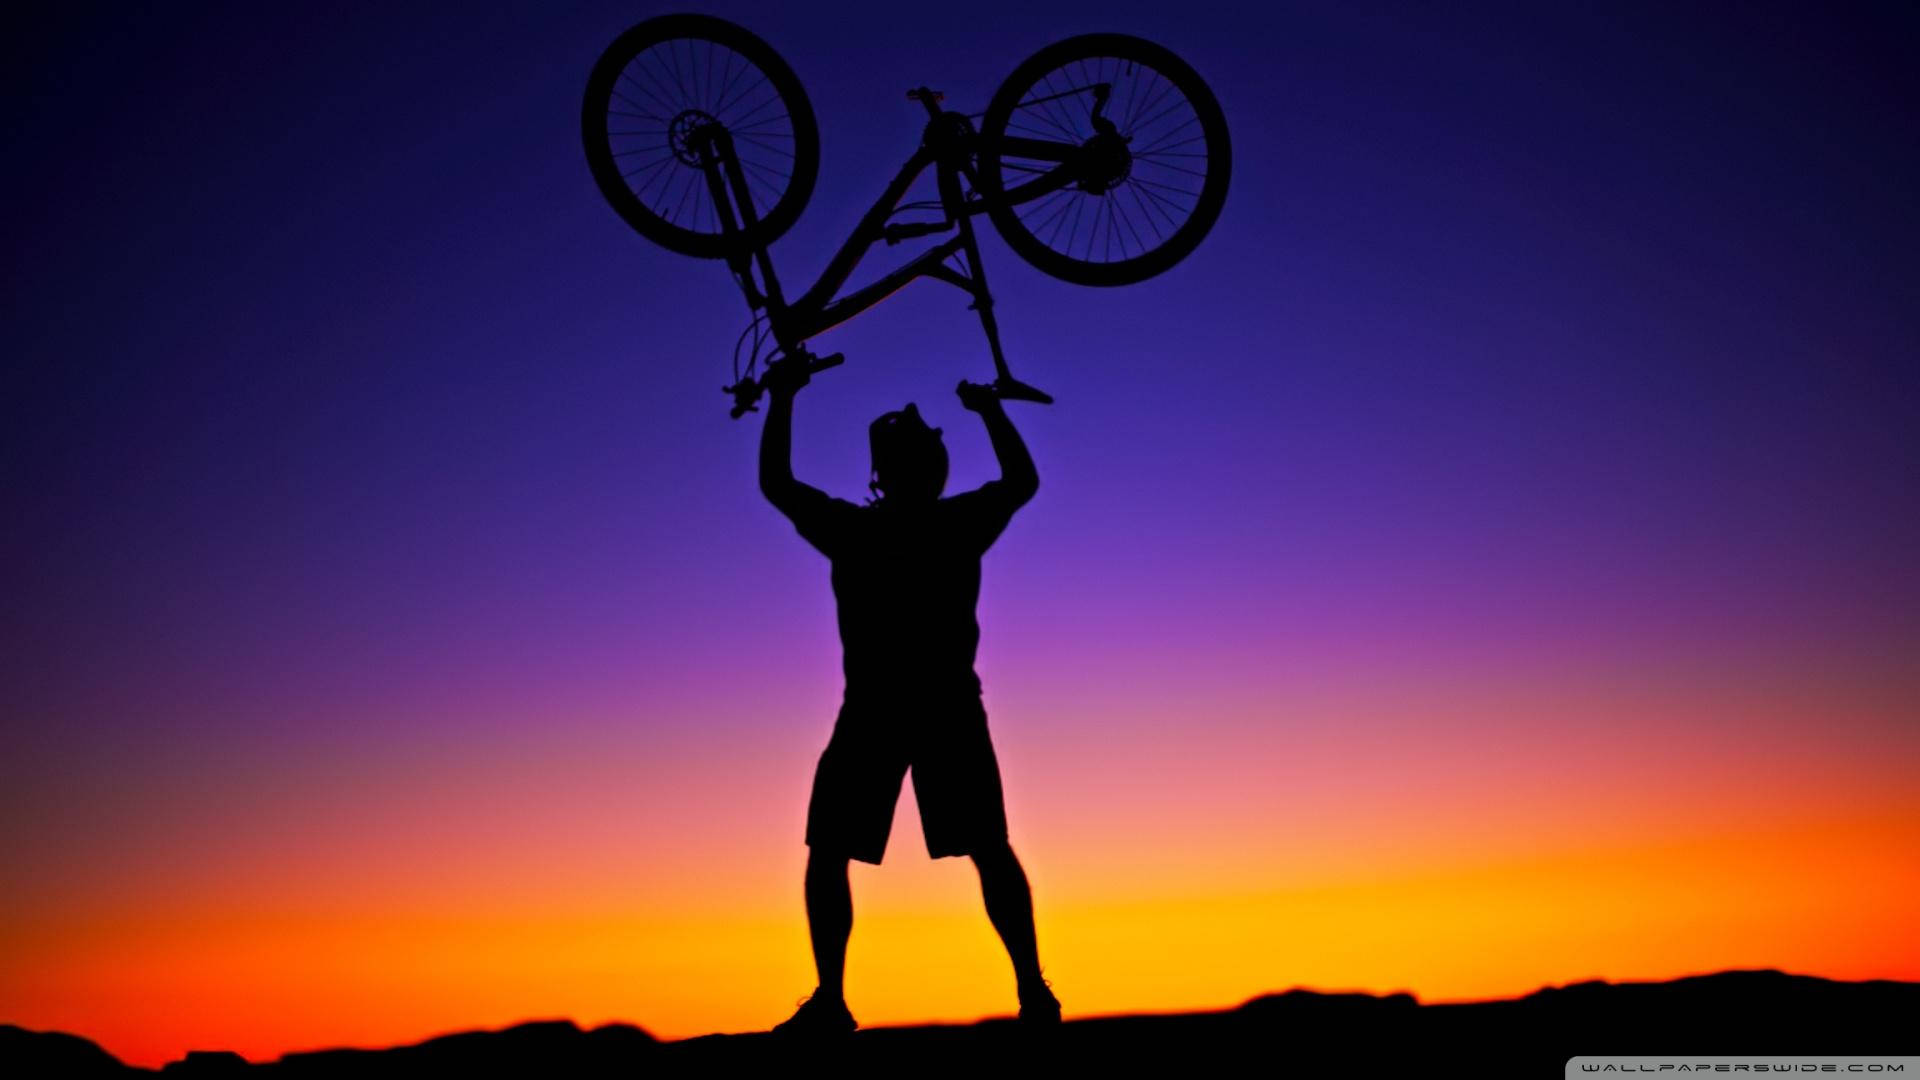 Victory Pose With A Bicycle Background